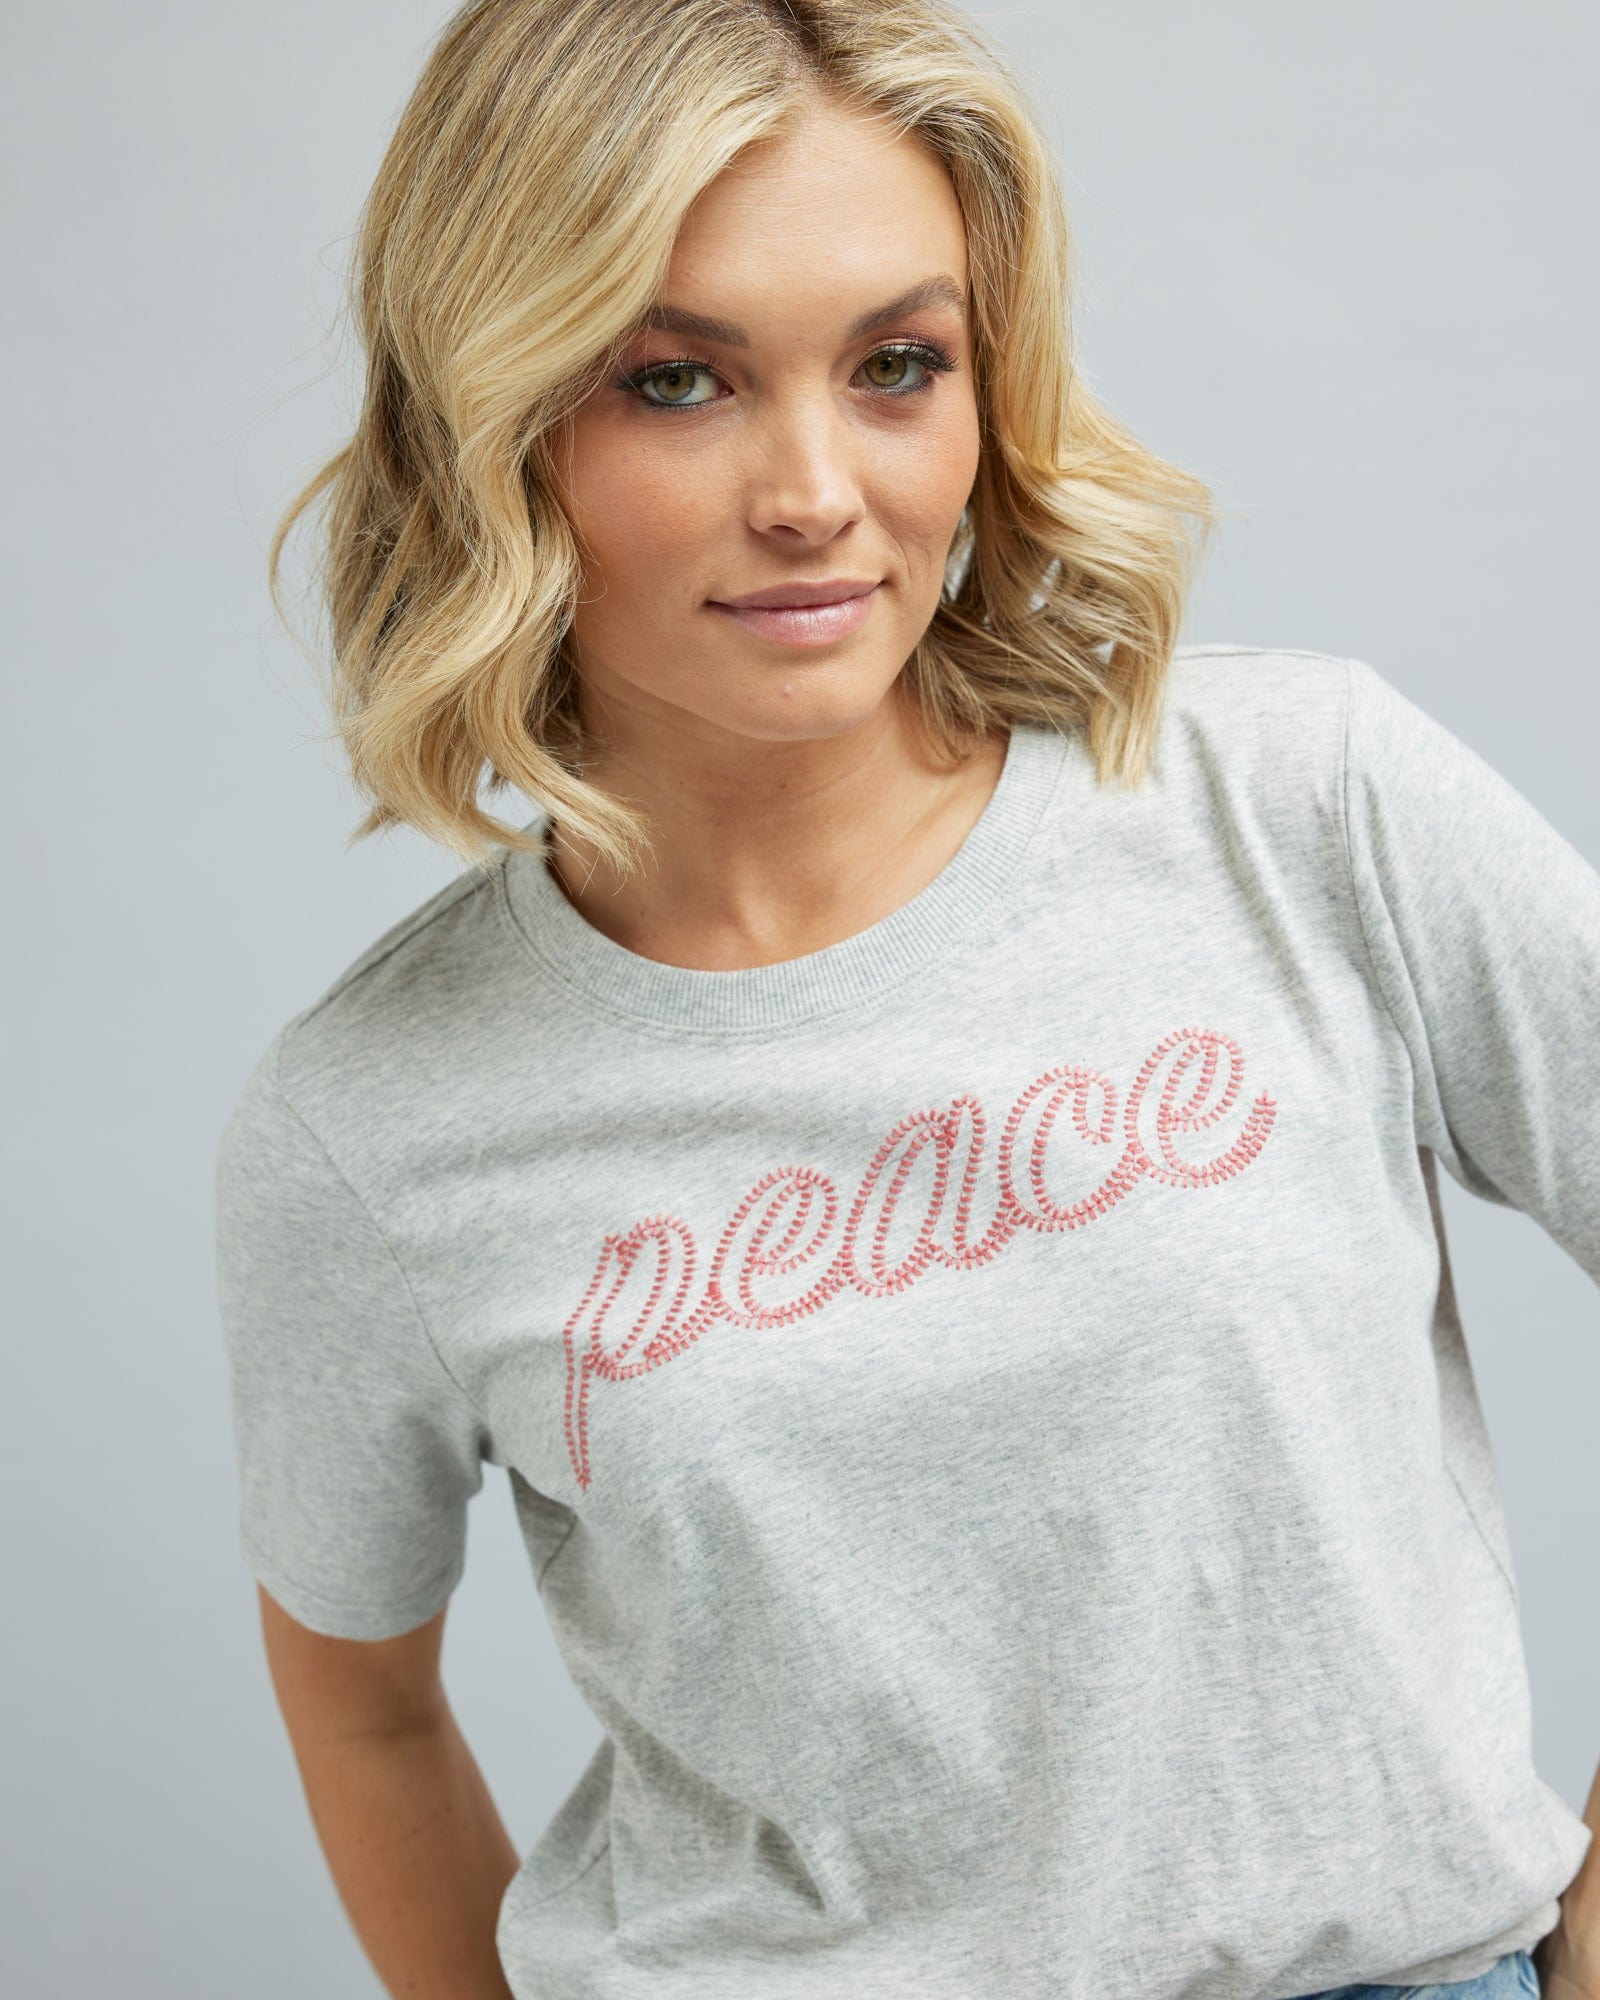 Woman in a short sleeve graphic tee that says "peace"